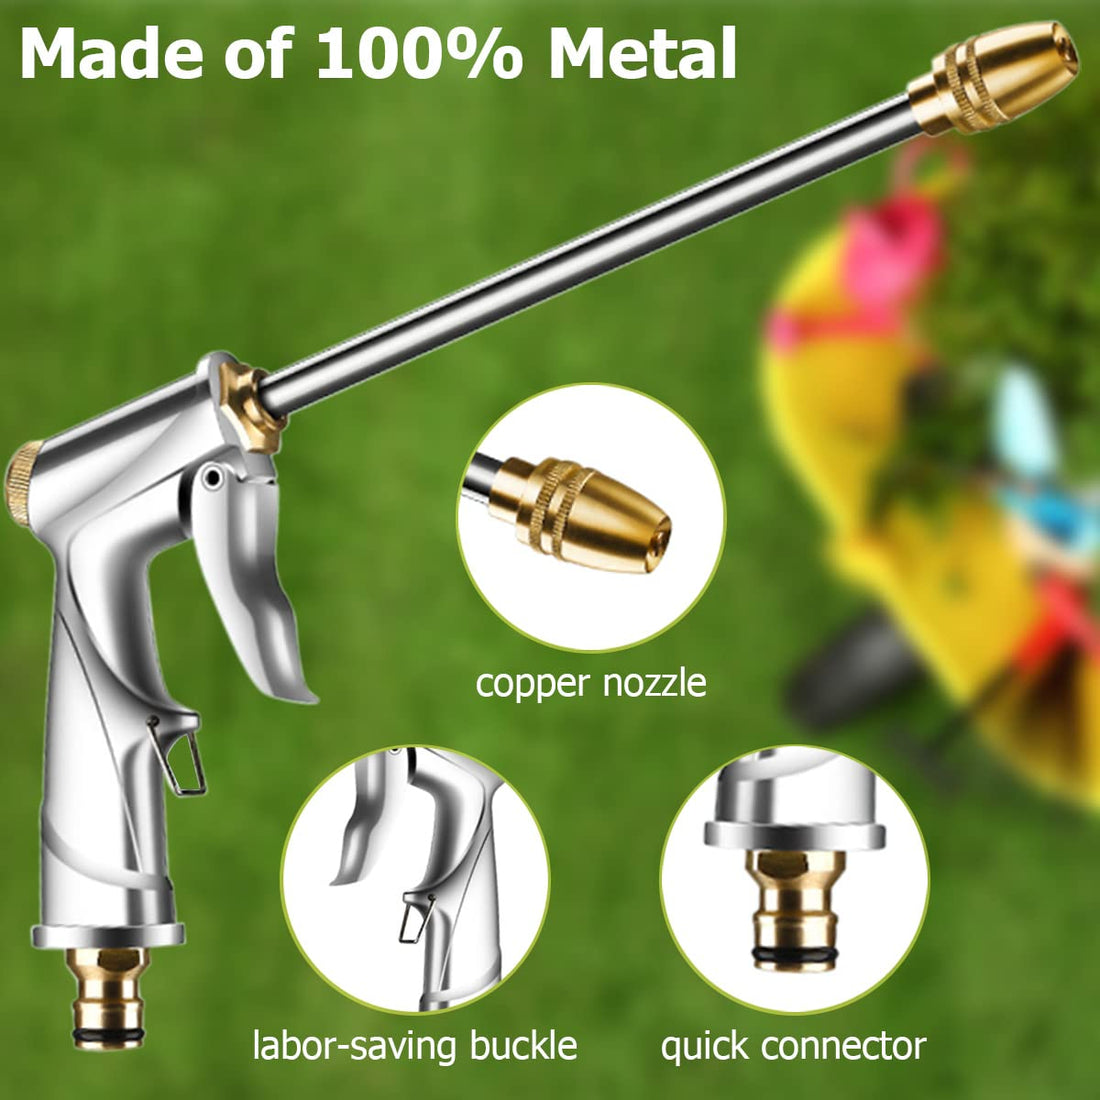 Garden Hose Nozzle Sprayer Heavy Duty Metal Brass Nozzle High Pressure Water Hose Nozzle Adjustable Spray Gun for Watering Plants,Lawn and Patio Cleaning,Car Washing